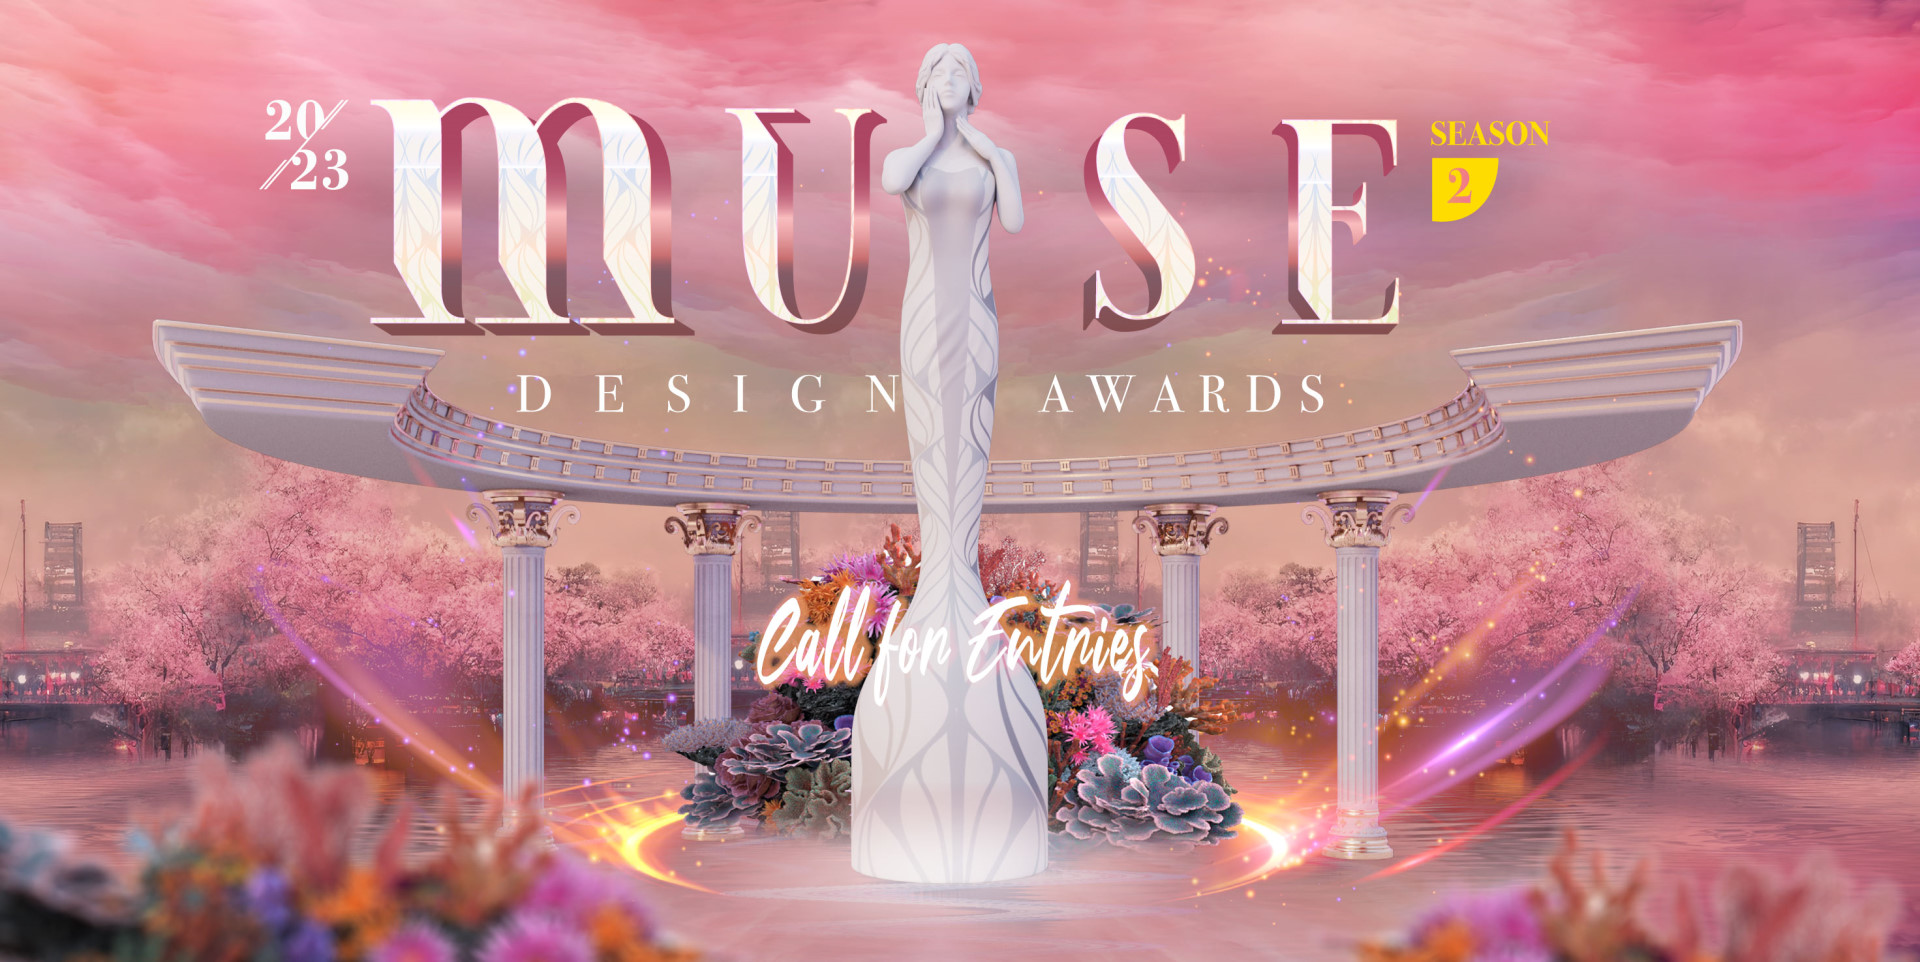 MUSE Design Awards: Season 2 2023 is now open for entries!